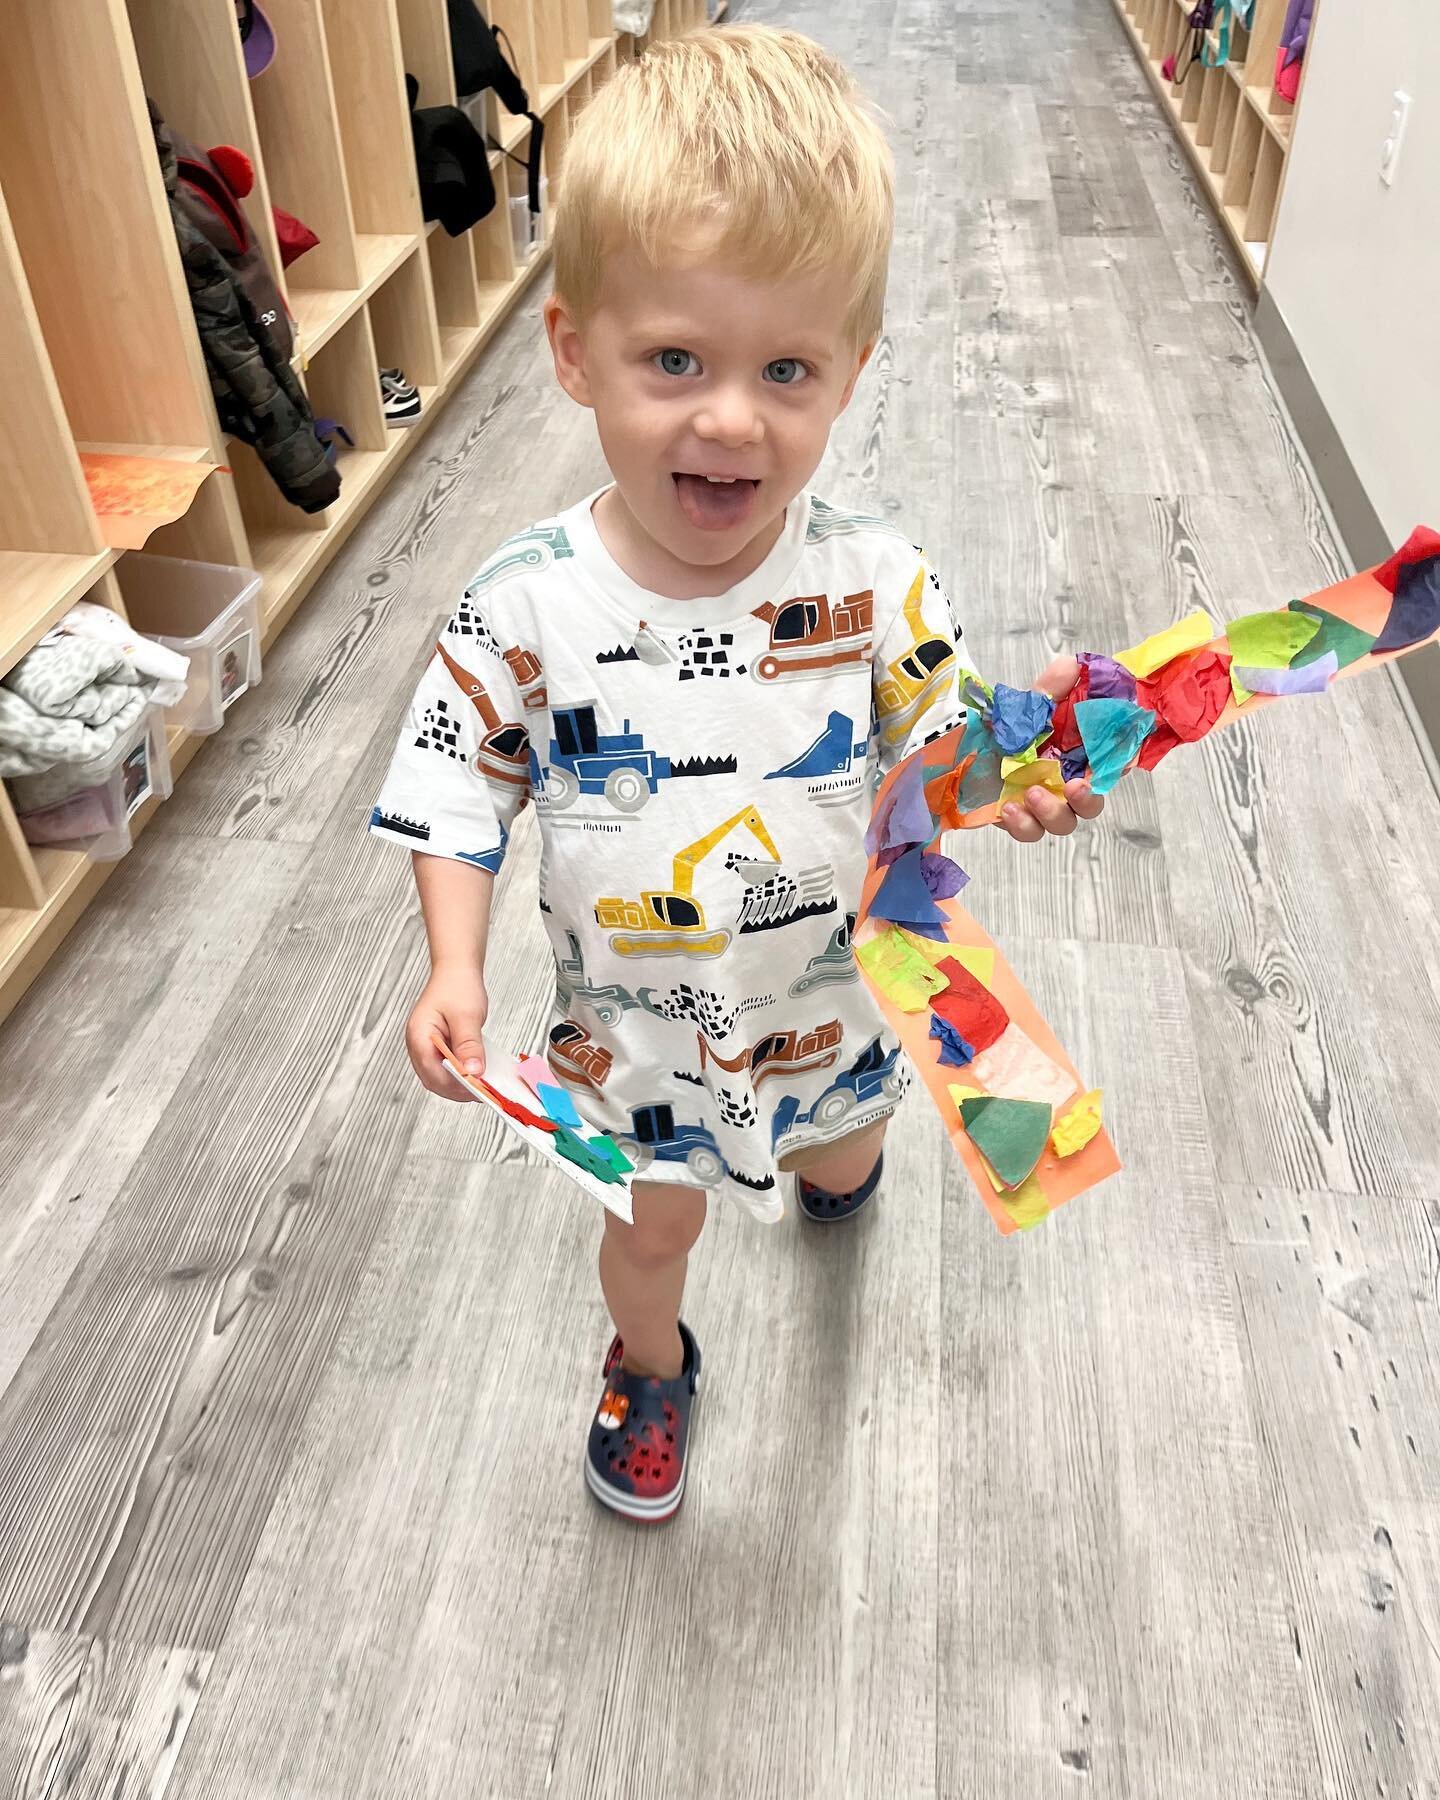 It&rsquo;s amazing how much a difference a year makes! Swipe to see how much Christian&rsquo;s grown! He started at @kidcochildcare a year ago when we moved to a new neighbourhood and he&rsquo;s been just thriving. He has three best friends, enjoys h